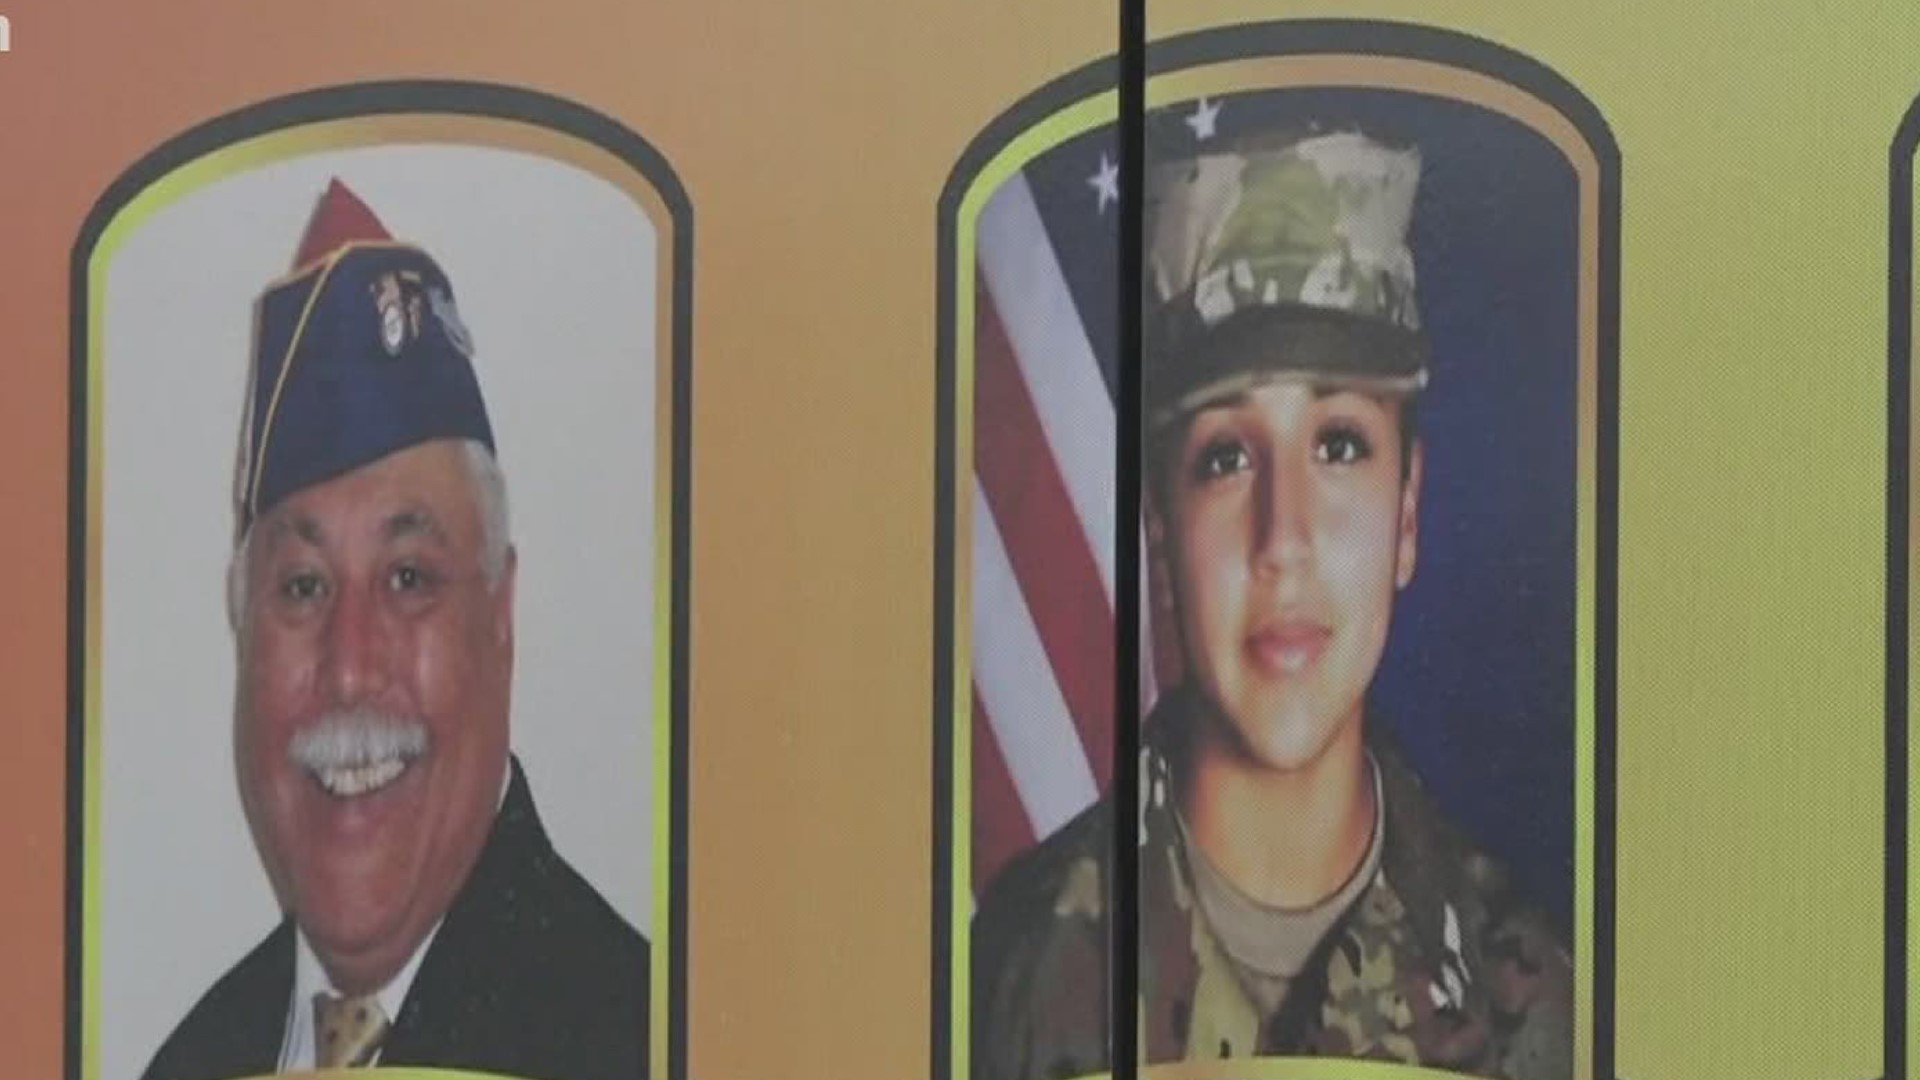 Many were recognized with their picture on the bus, including slain Fort Hood soldier Vanessa Guillen.